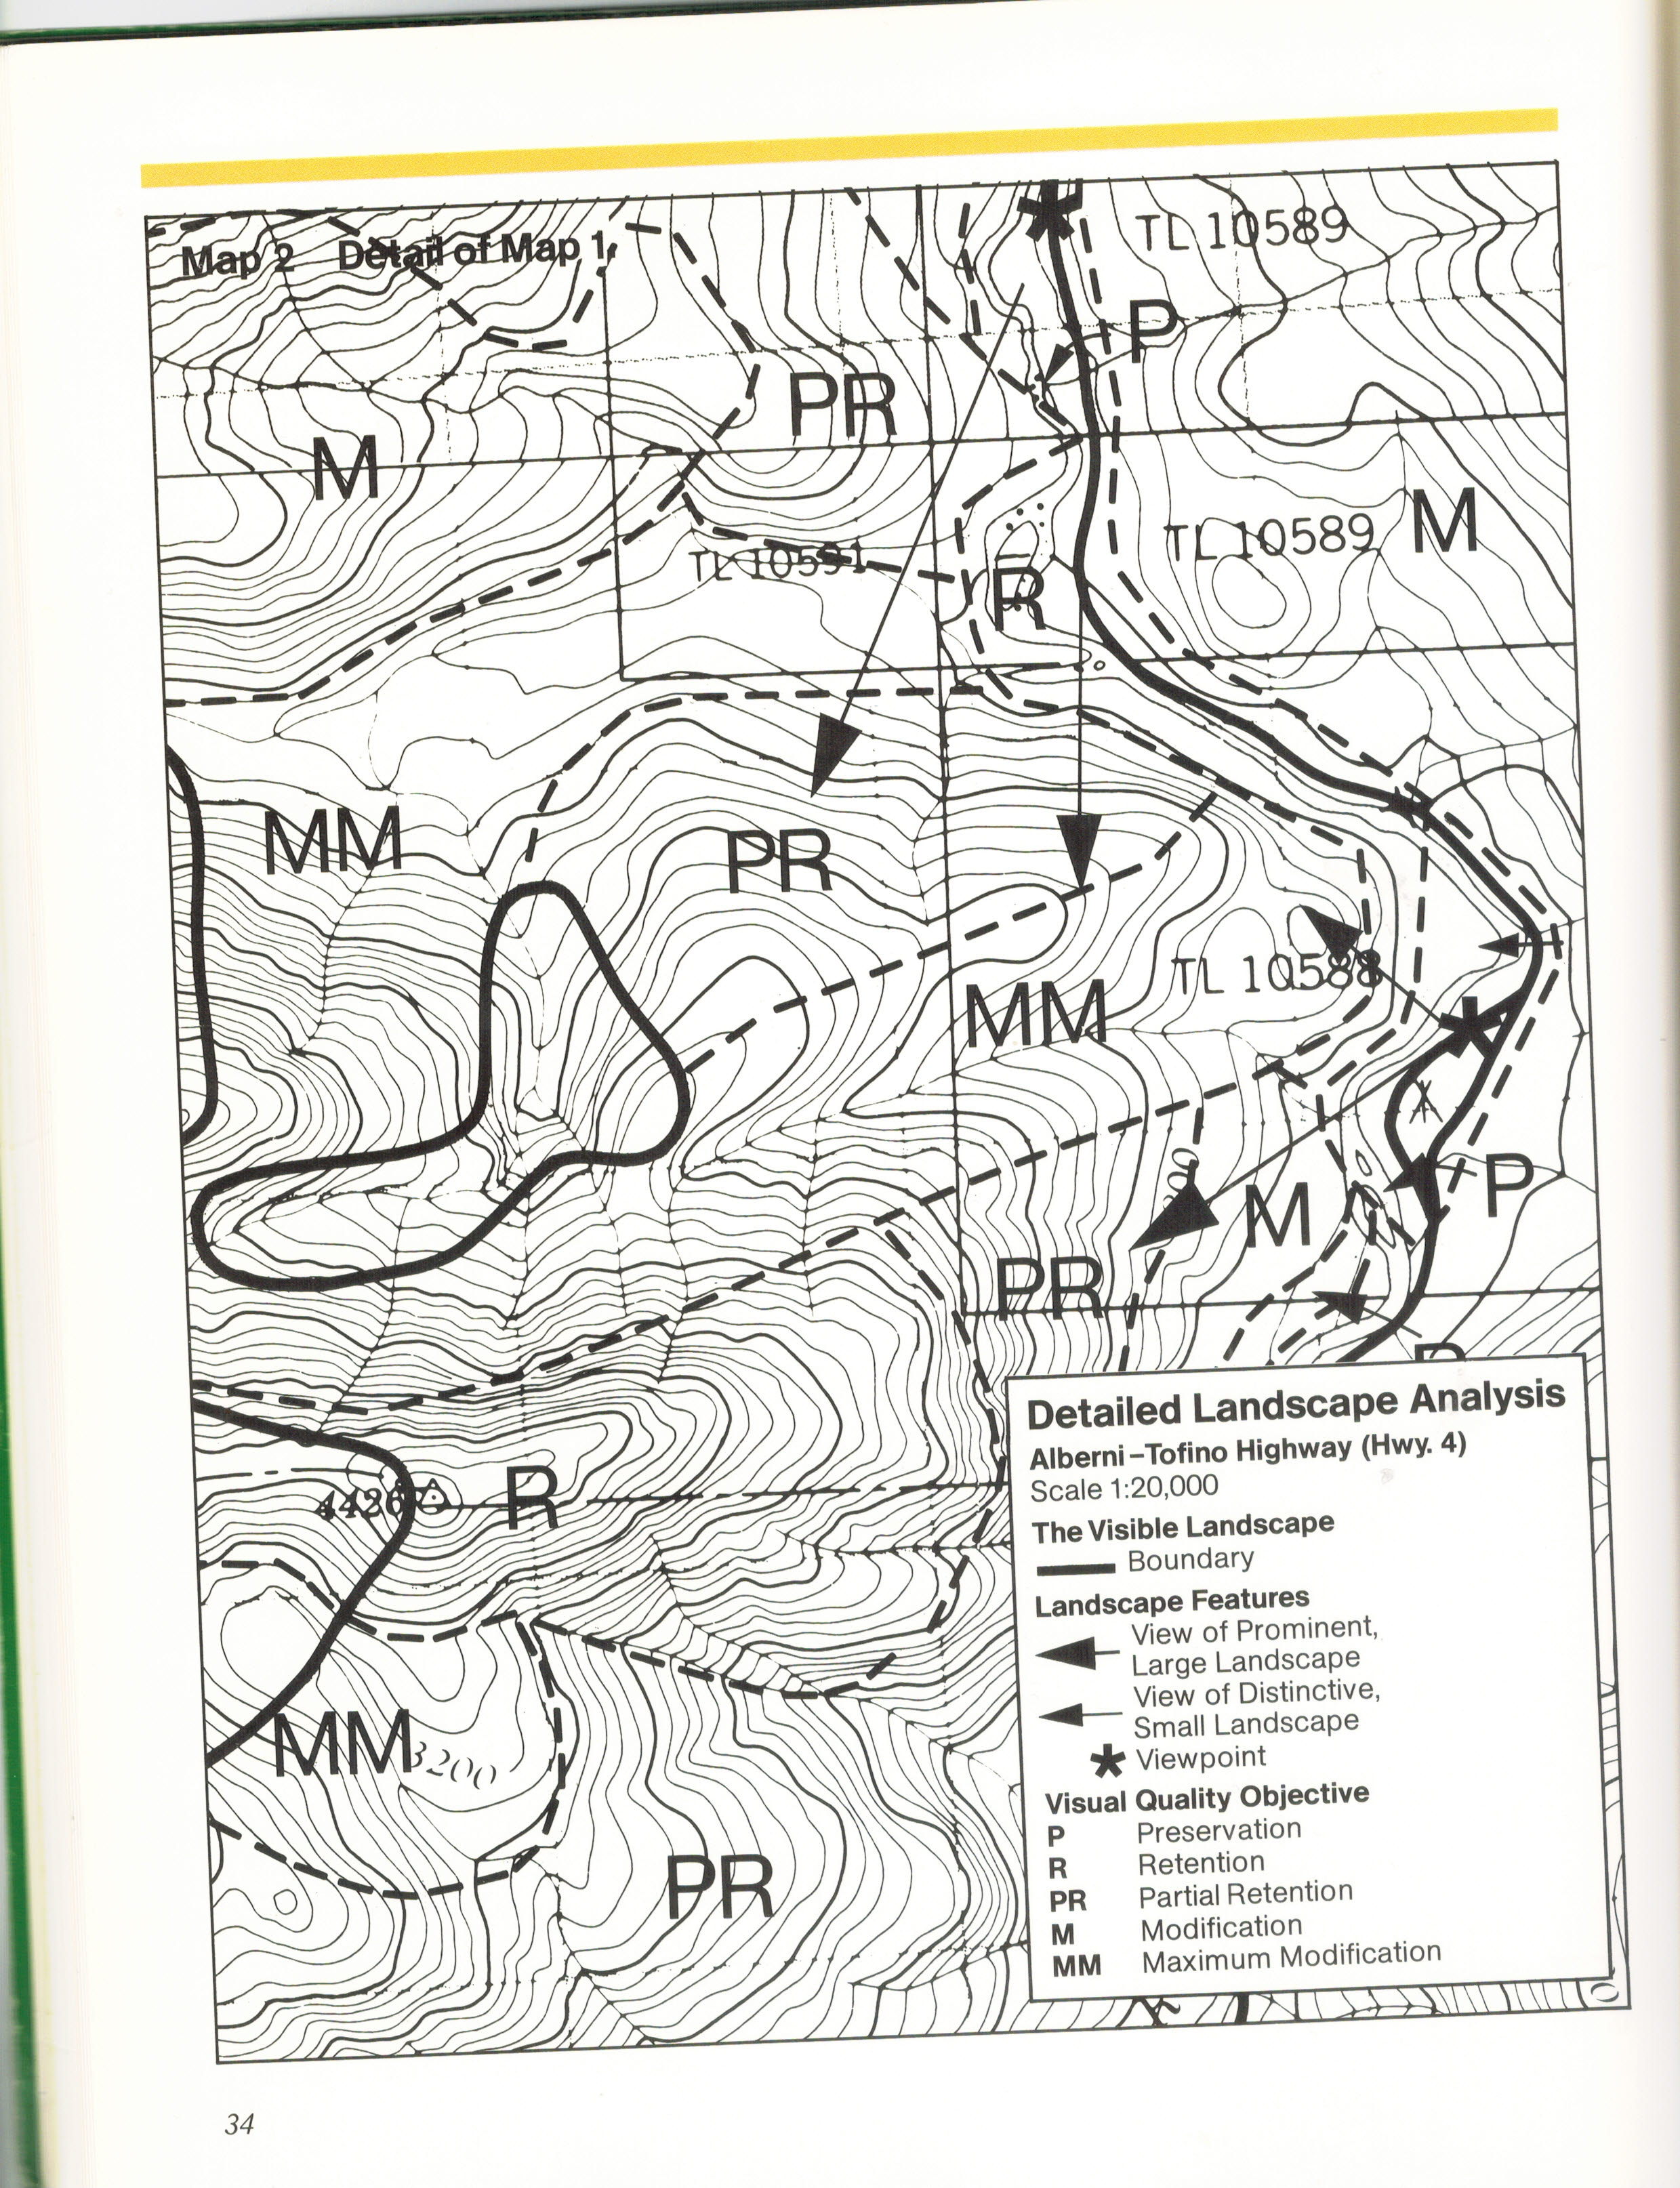 Original Visual Quality Objectives for Alberni-Tofino Highway Visual Landscape Inventory mapped by KB Fairhurst 1980.